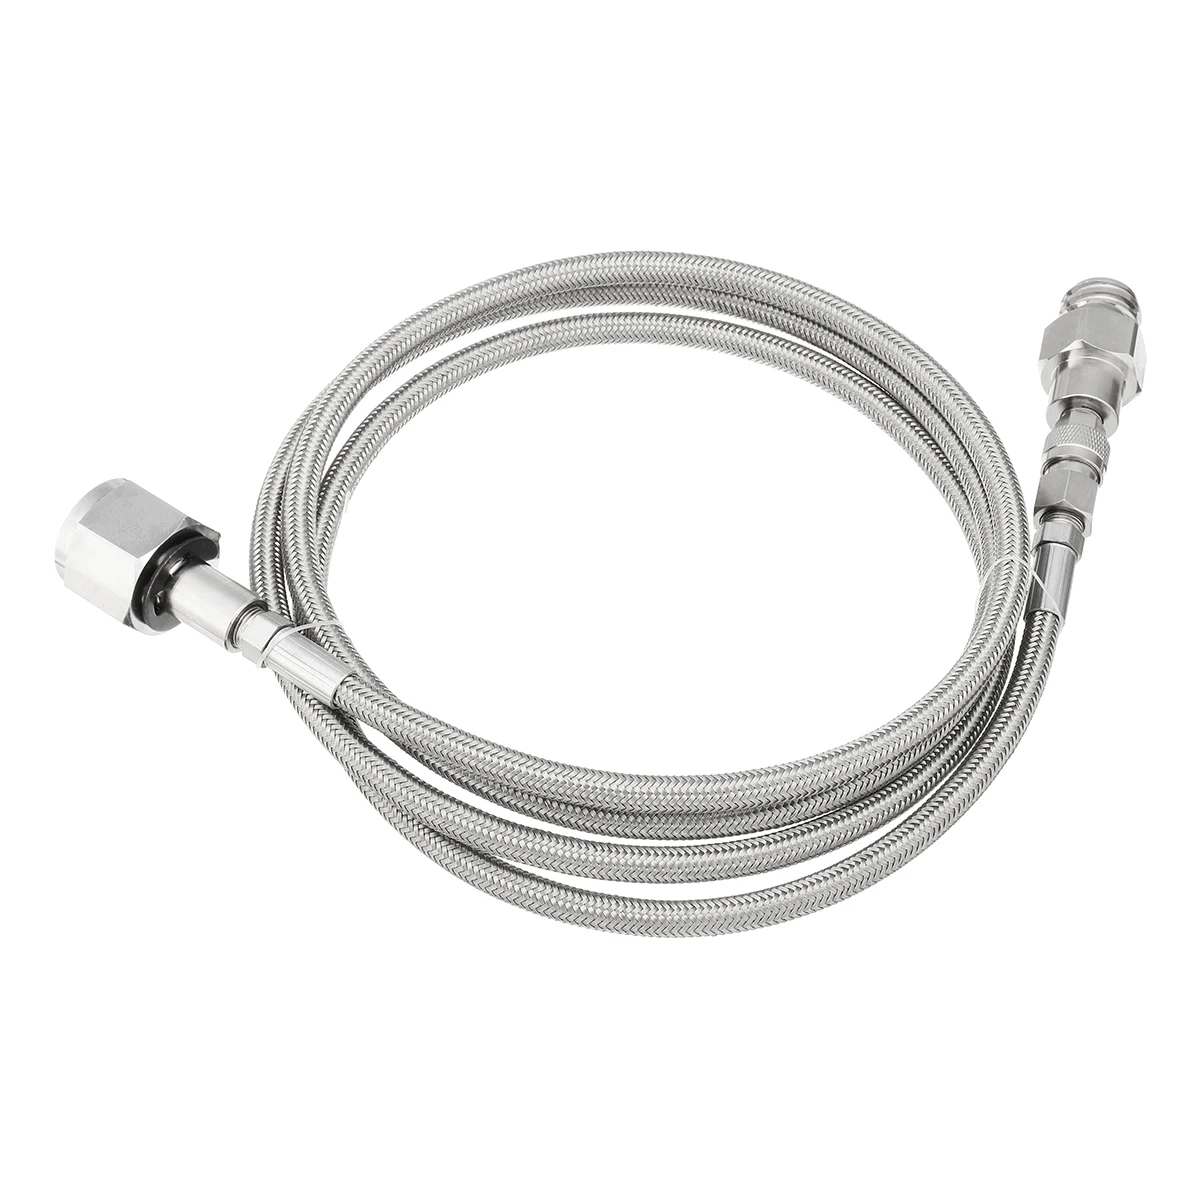 

CO2 for SodaStream Soda Club To External CGA320 Tank Direct Adapter and Hose Kit 72inch Braided Hose